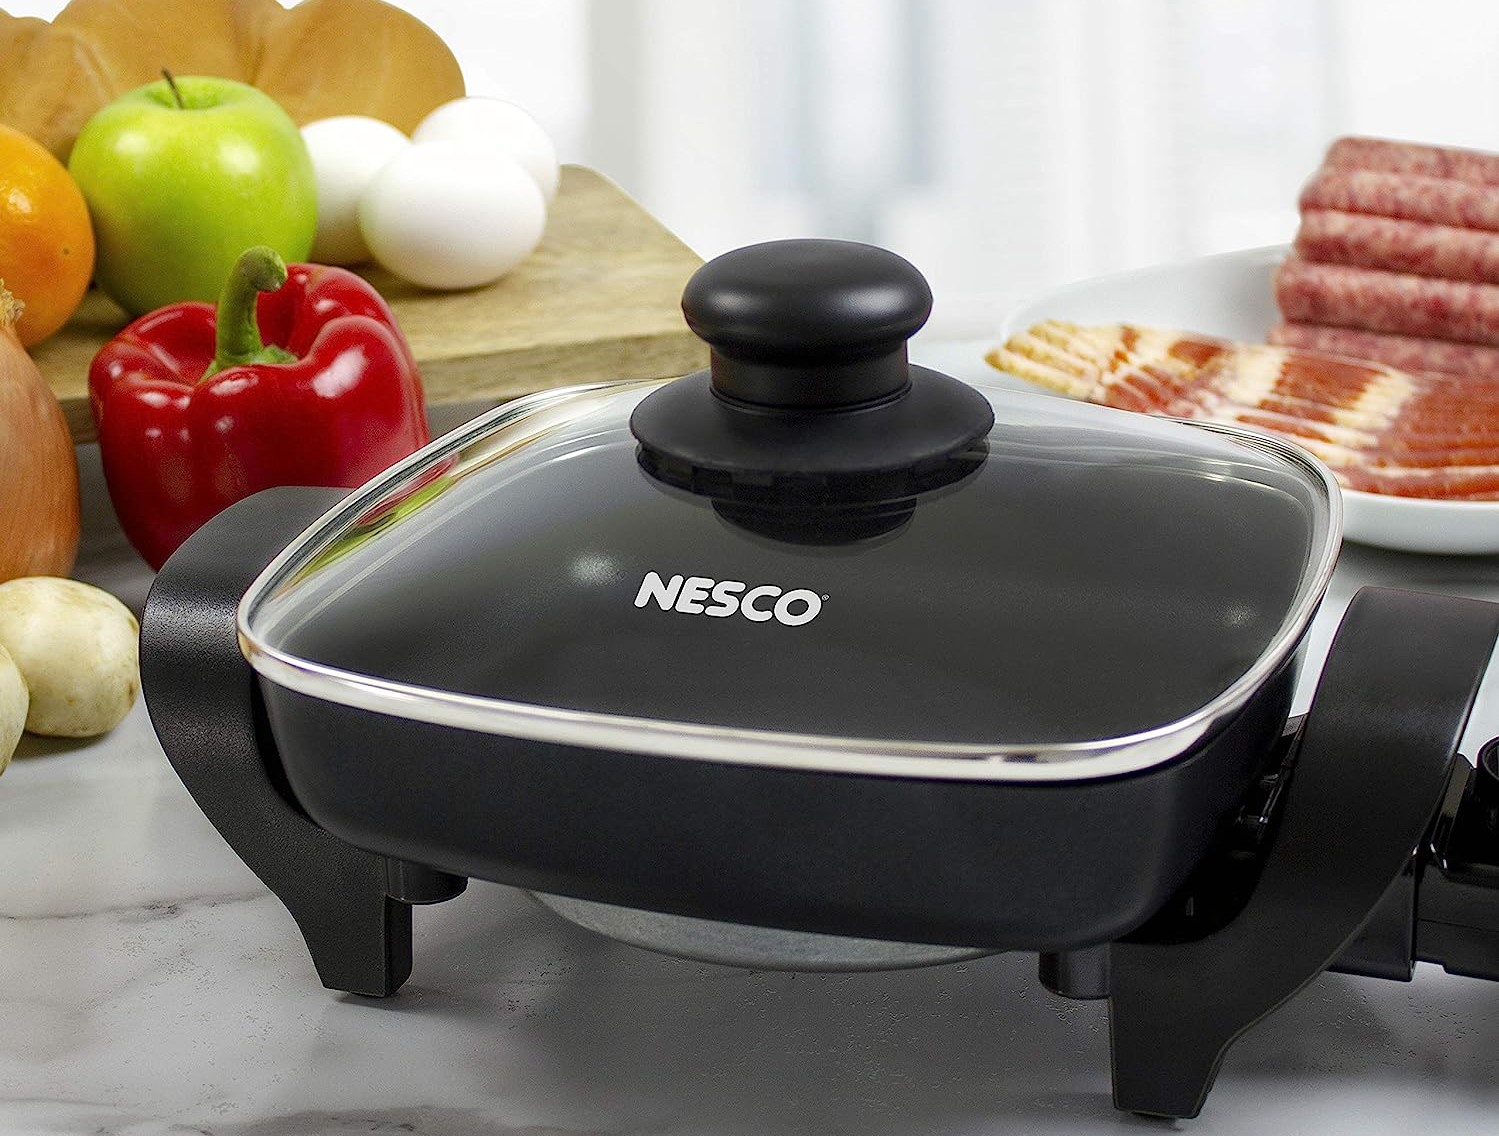 https://storables.com/wp-content/uploads/2023/07/nesco-extra-deep-electric-skillet-what-kind-of-non-stick-surface-safe-1690190479.jpg